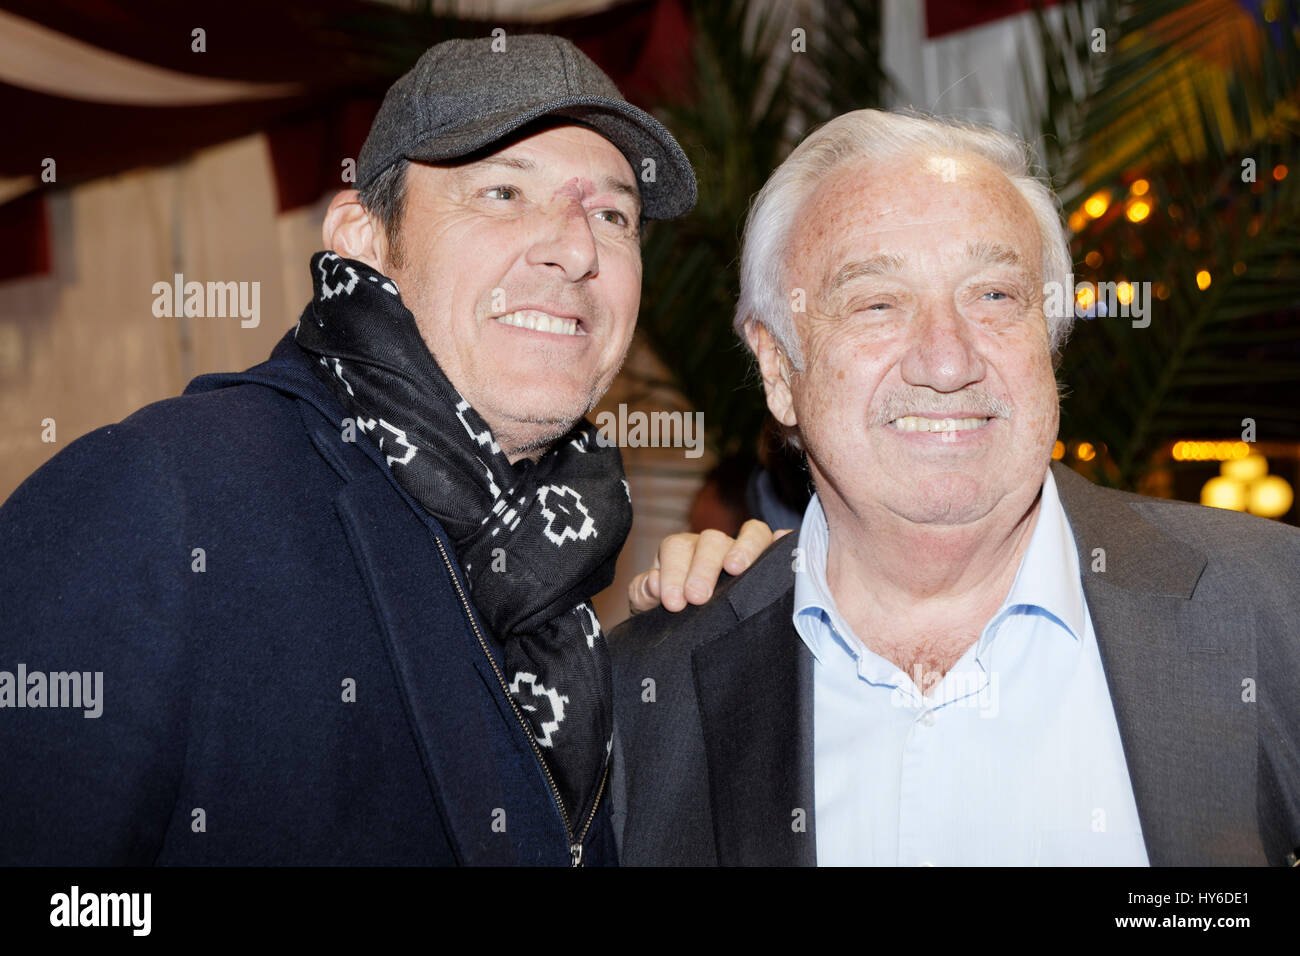 31th March,2017.Jean-Luc Reichmann,Marcel Campion attend at Opening evening of the Throne Fair for the benefit of the Association Petits Princes,Paris Stock Photo